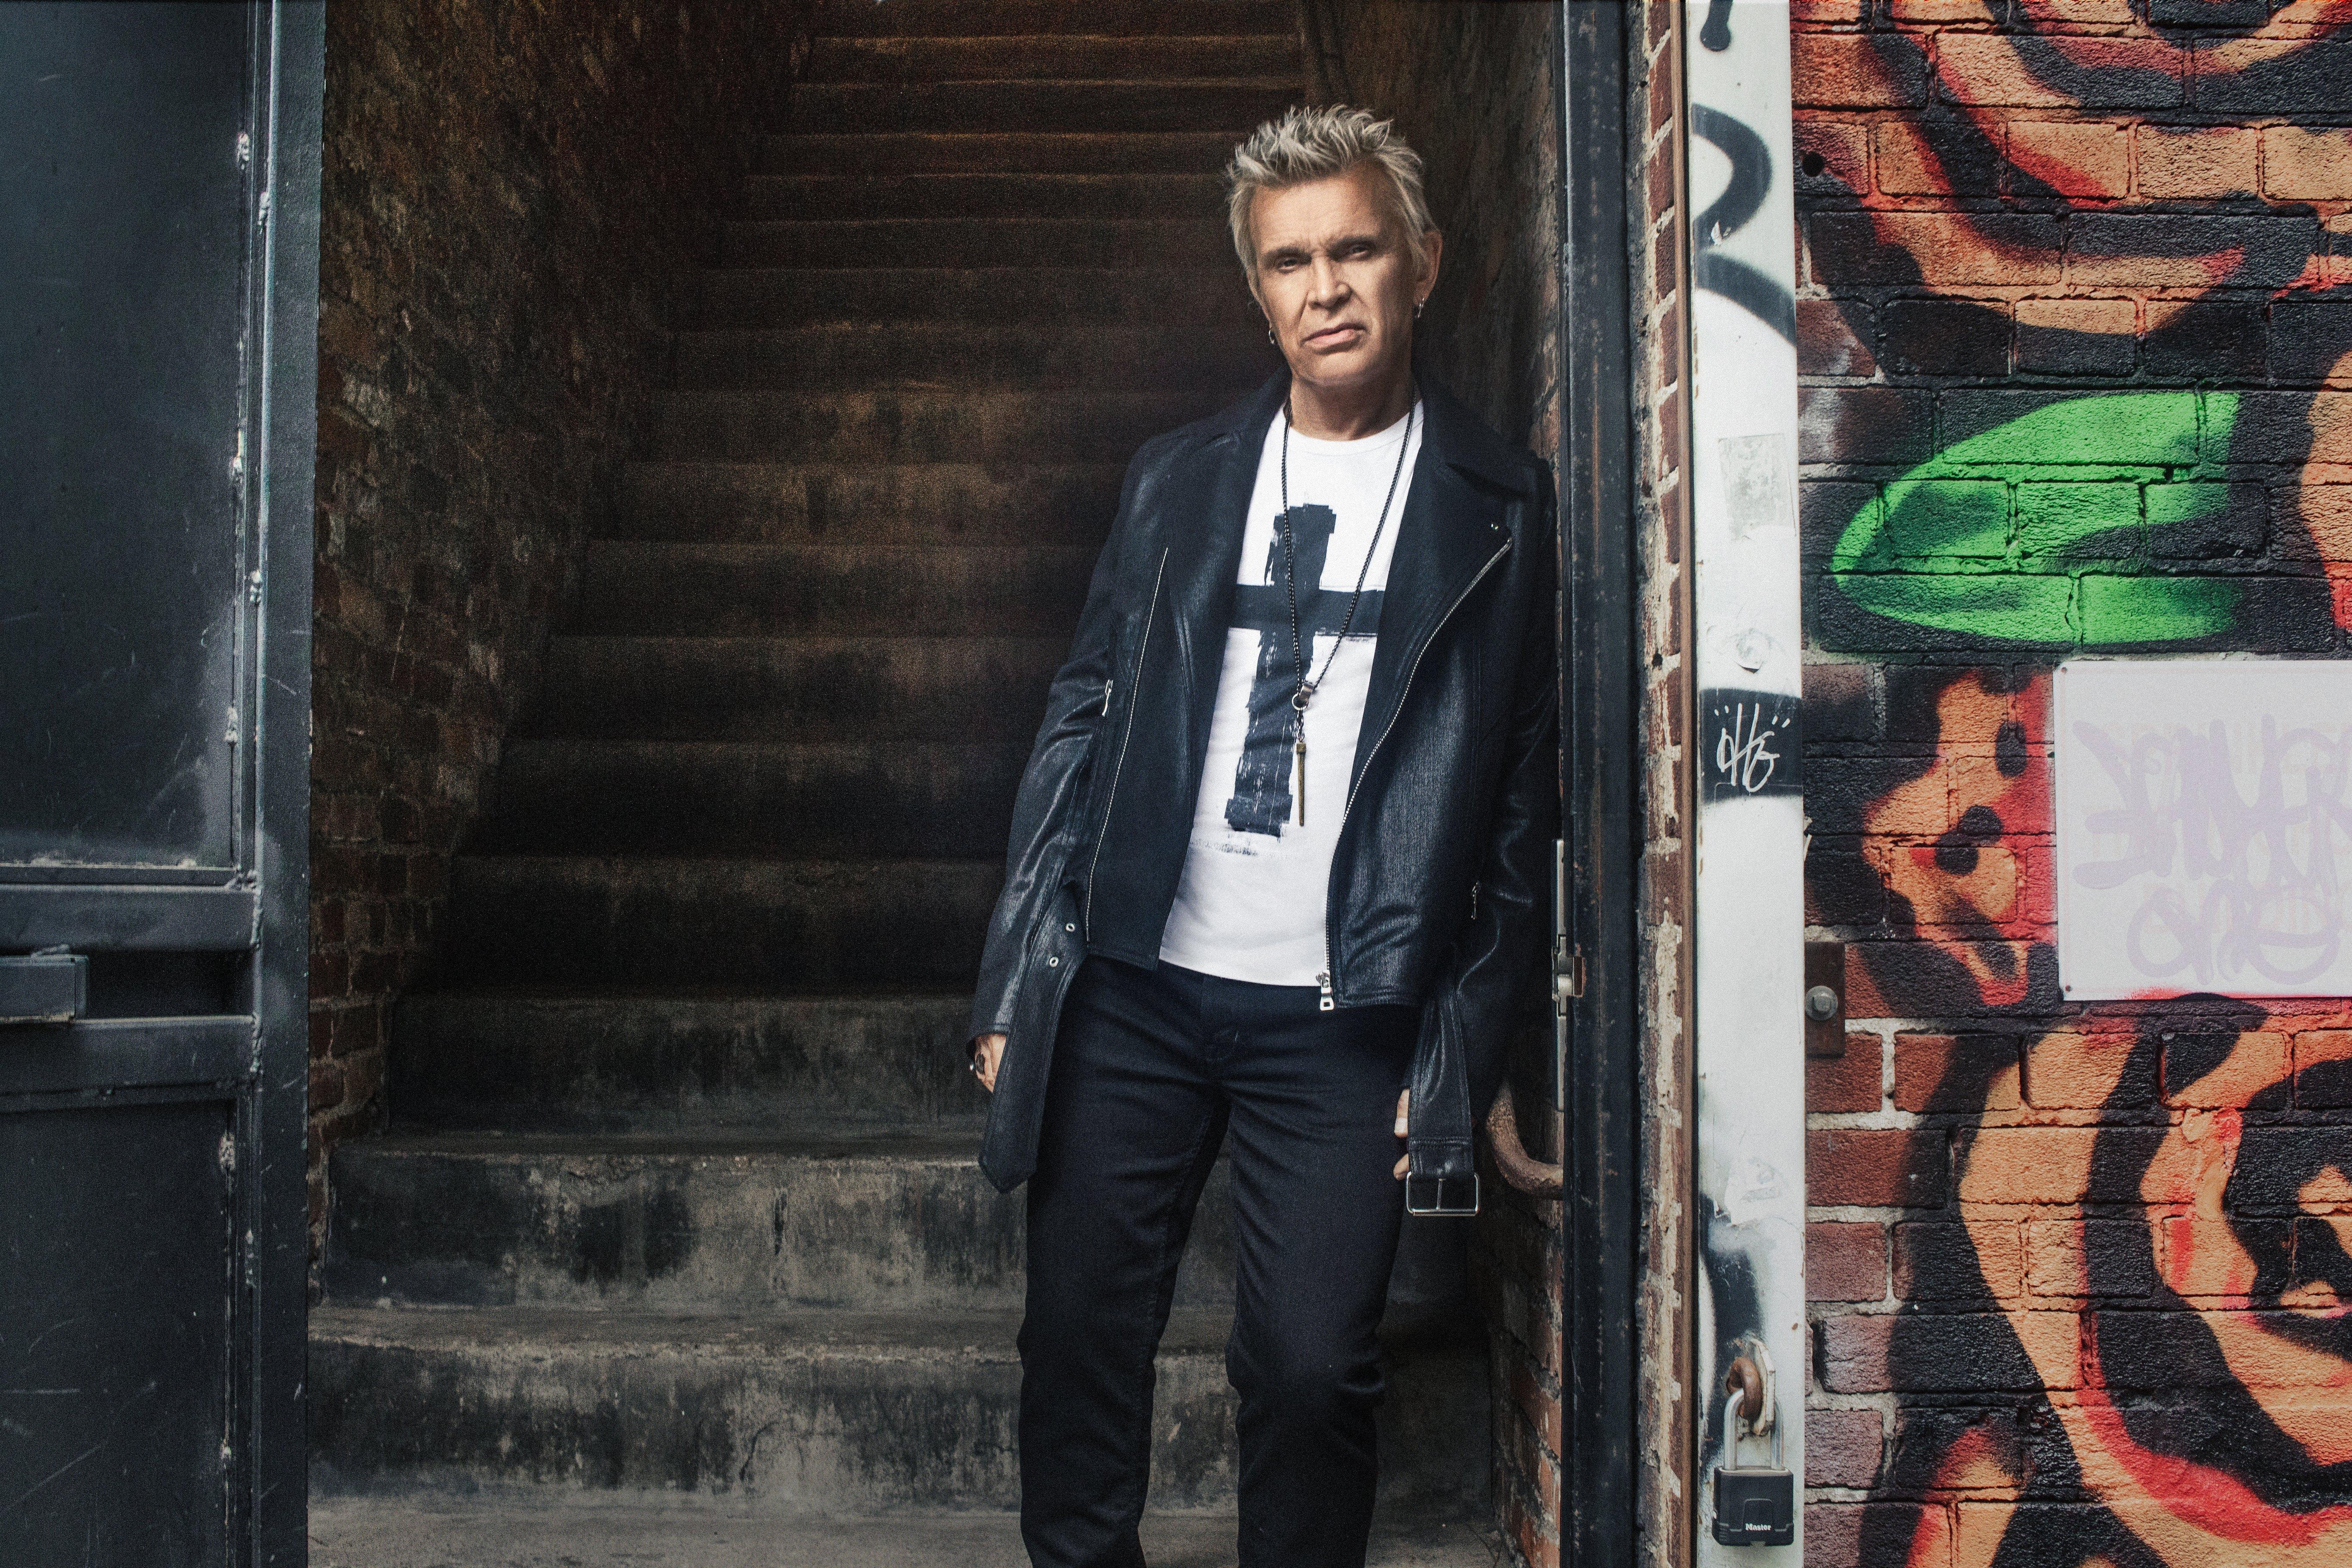 Living Legends Billy Idol On Survival, Revival and Breaking Out Of The Cage GRAMMY image